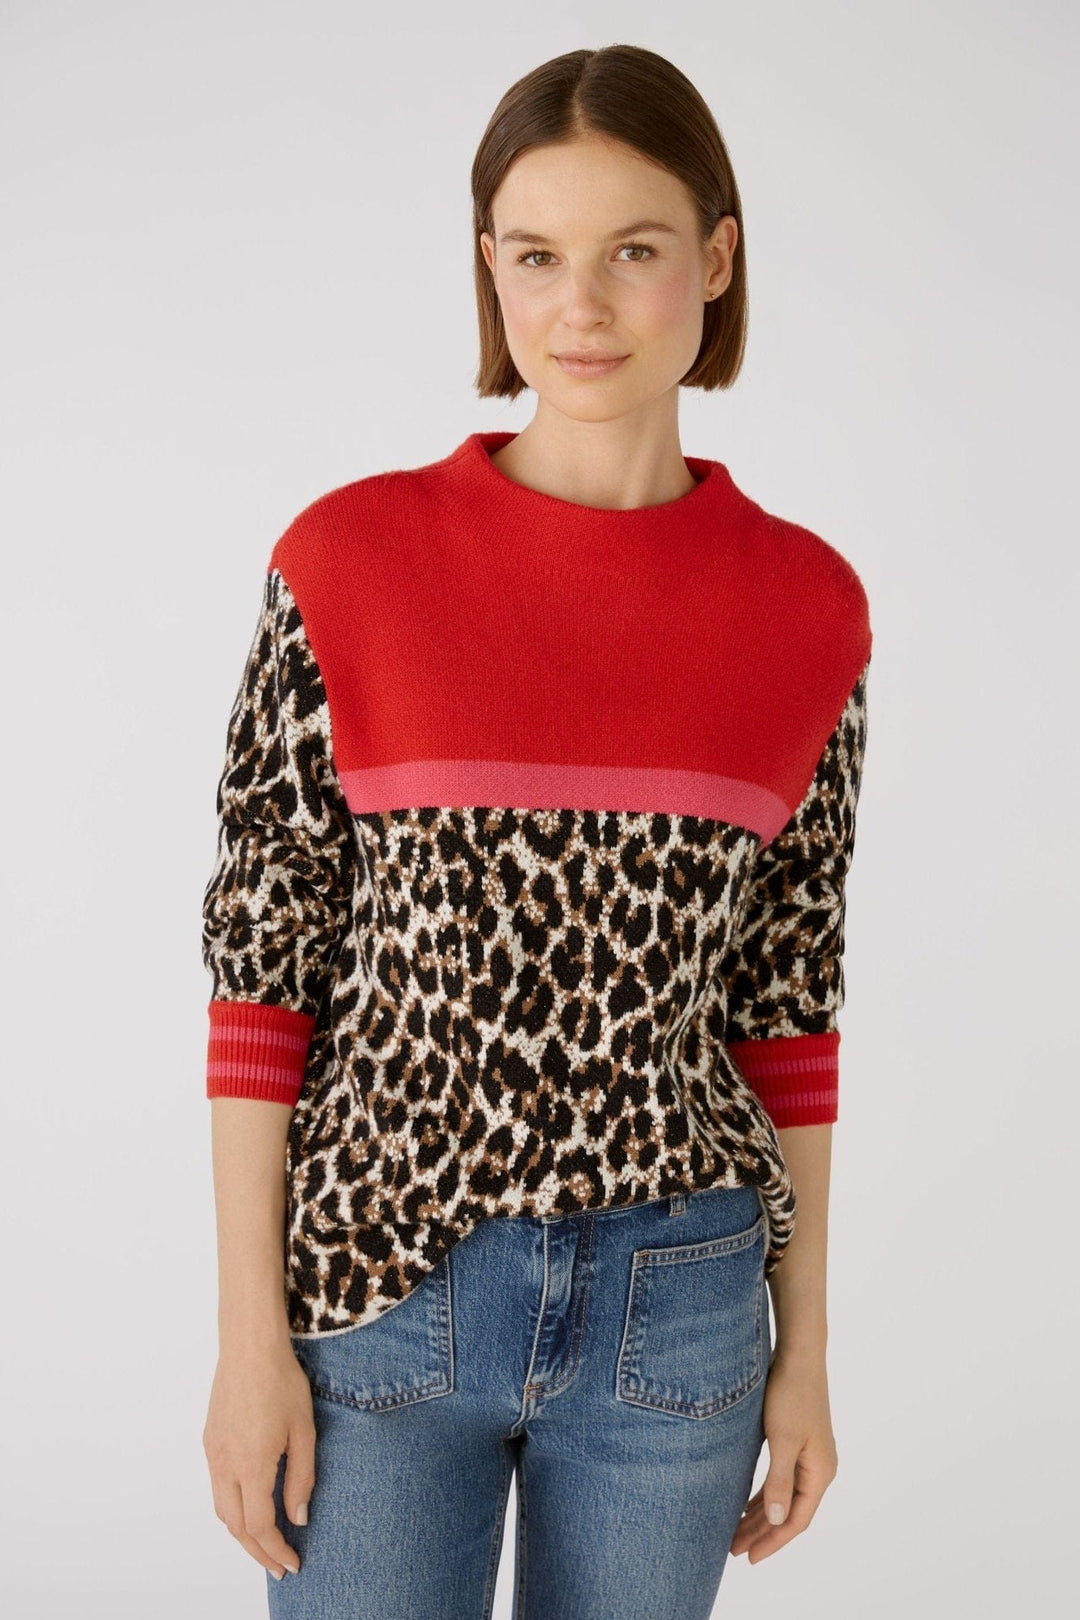 Oui Animal Print Knitted Jumper In Brown & Red - Crabtree Cottage